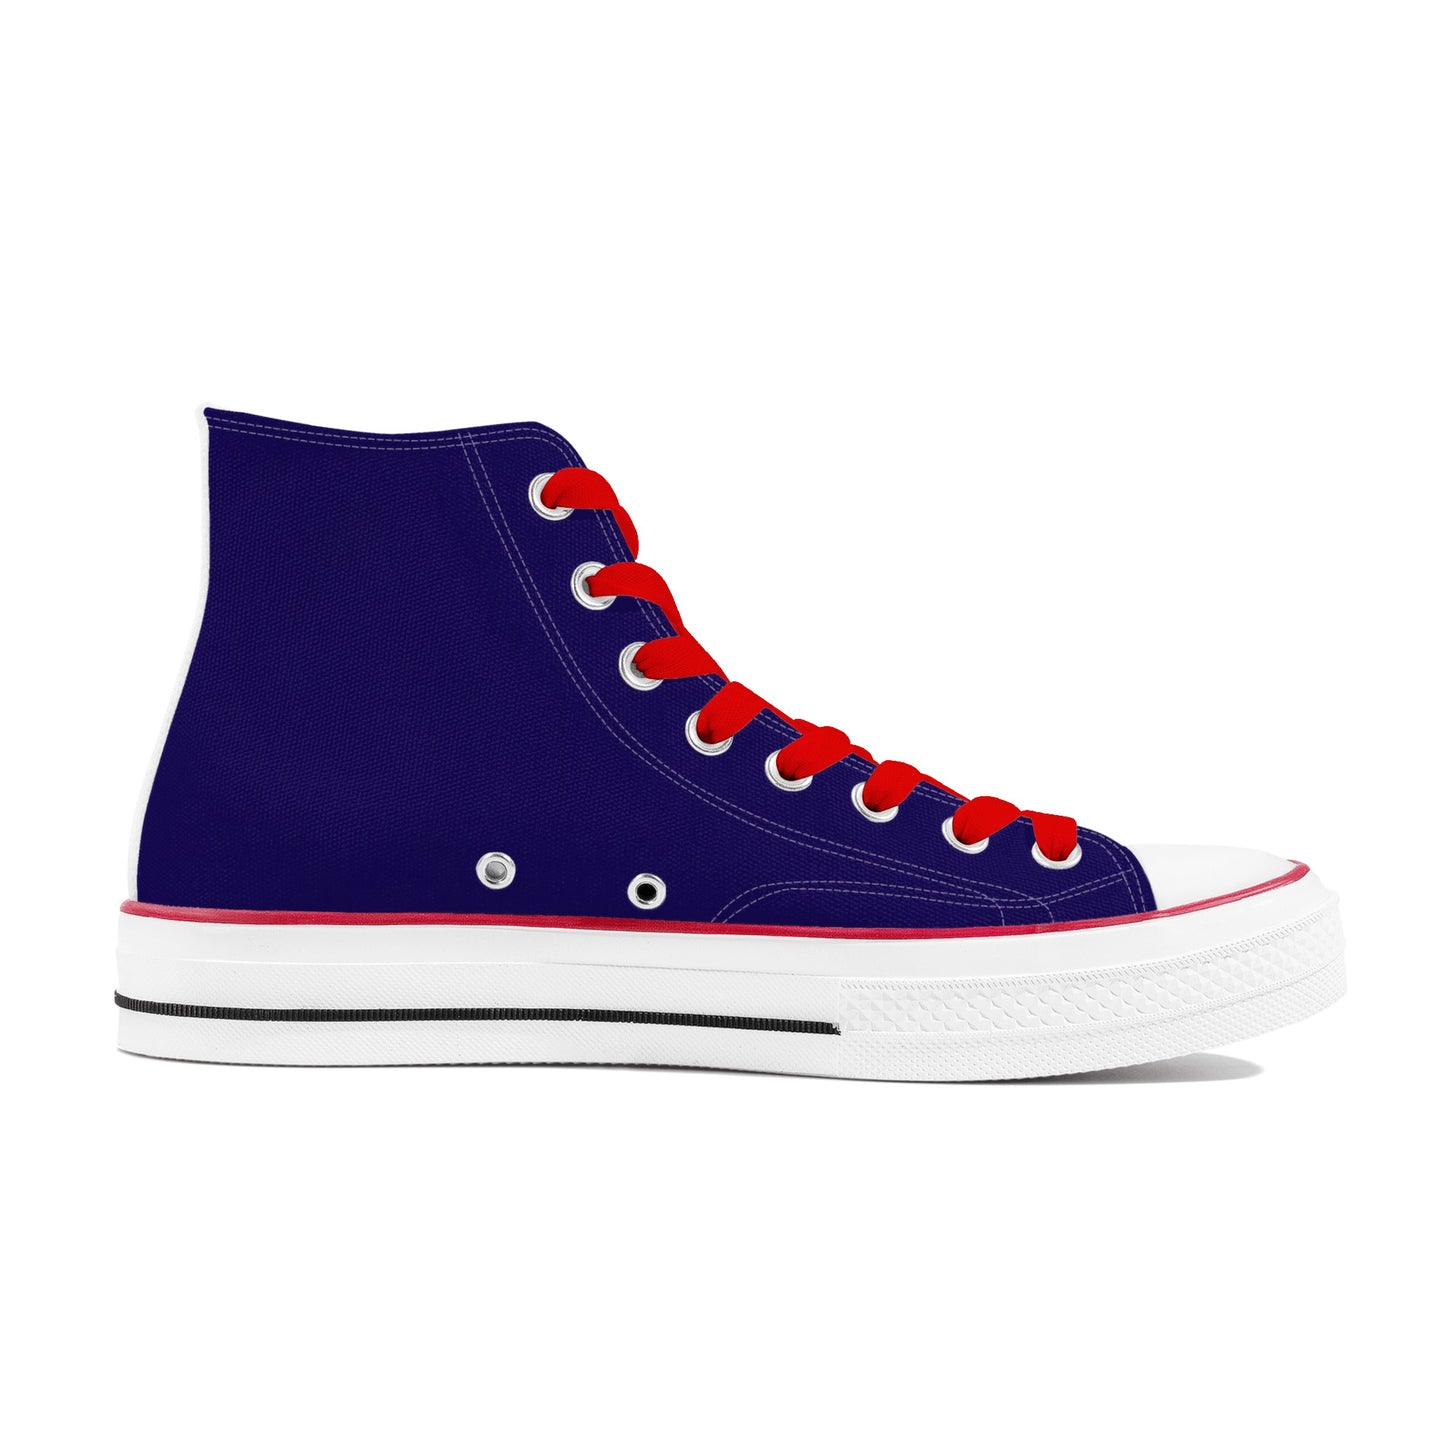 Loki - Classic High Top Canvas Shoes